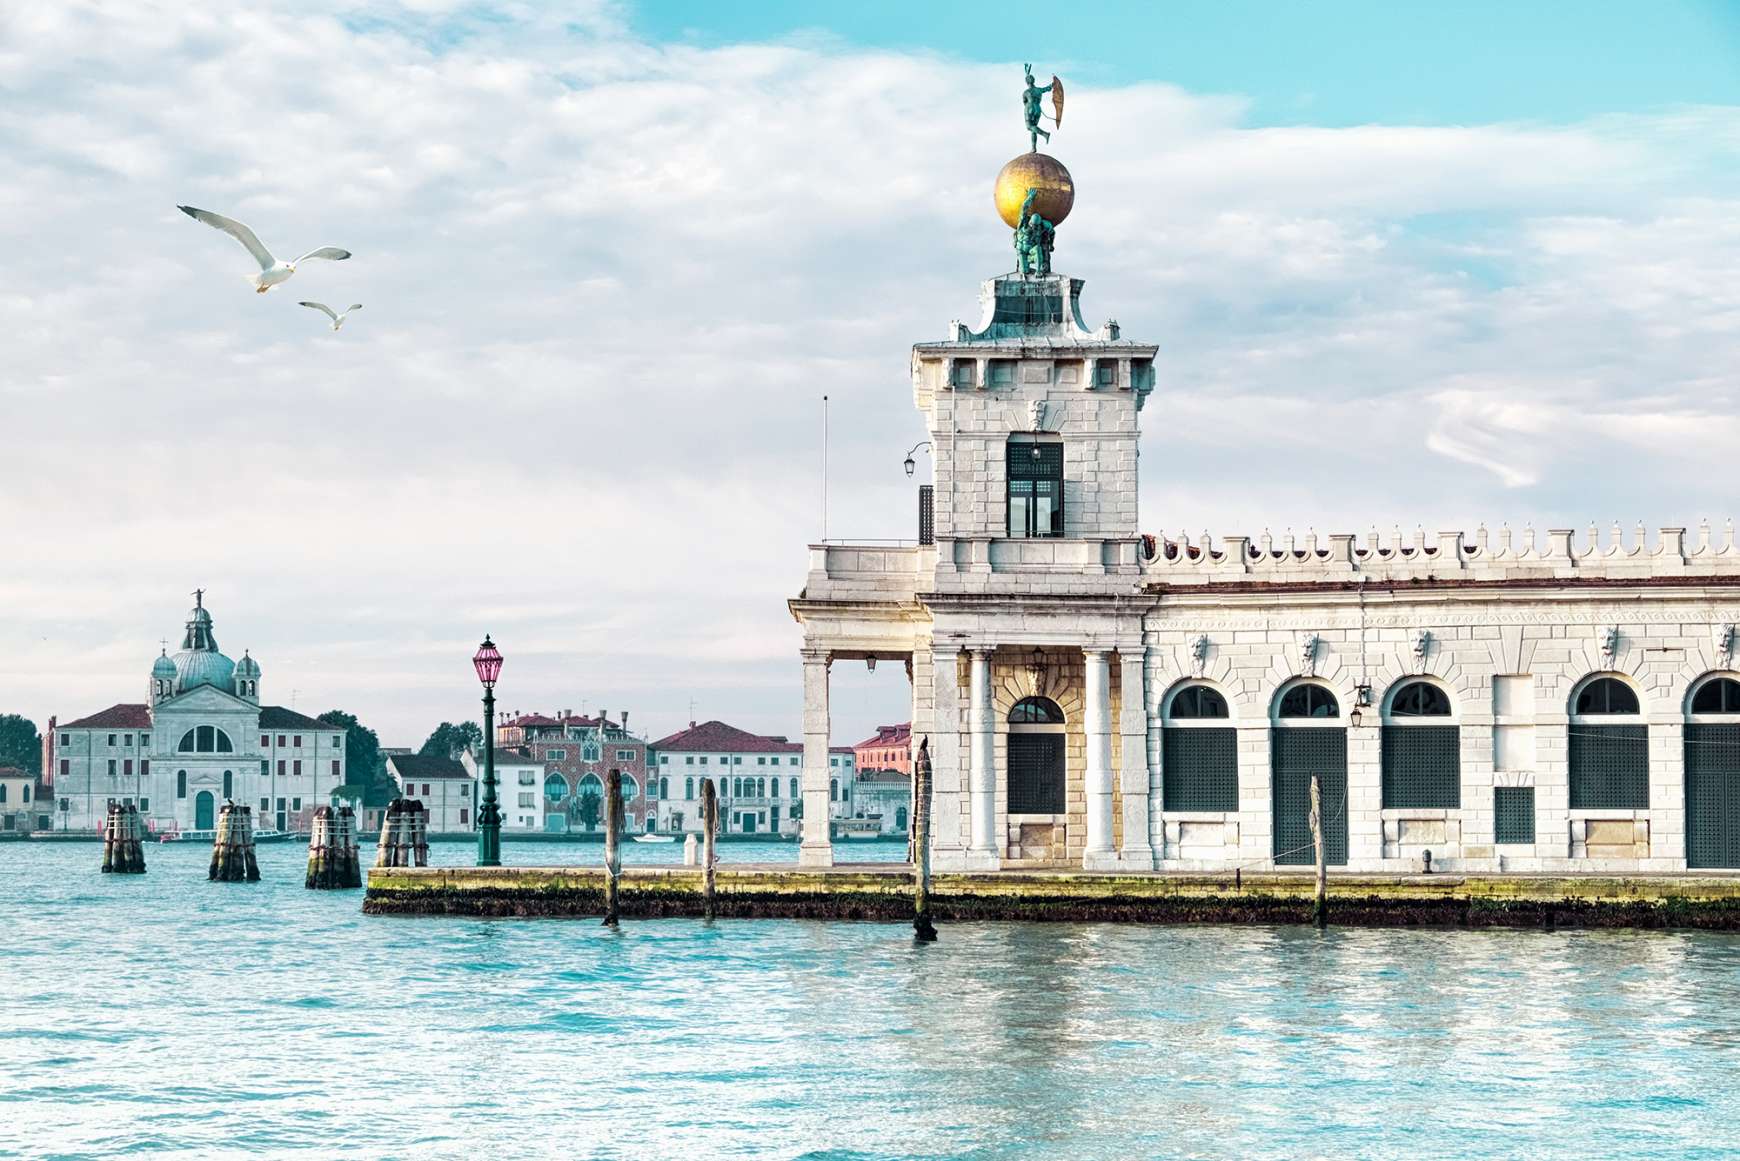 View of Punta della Dogana's art center jutting out into the water in Venice